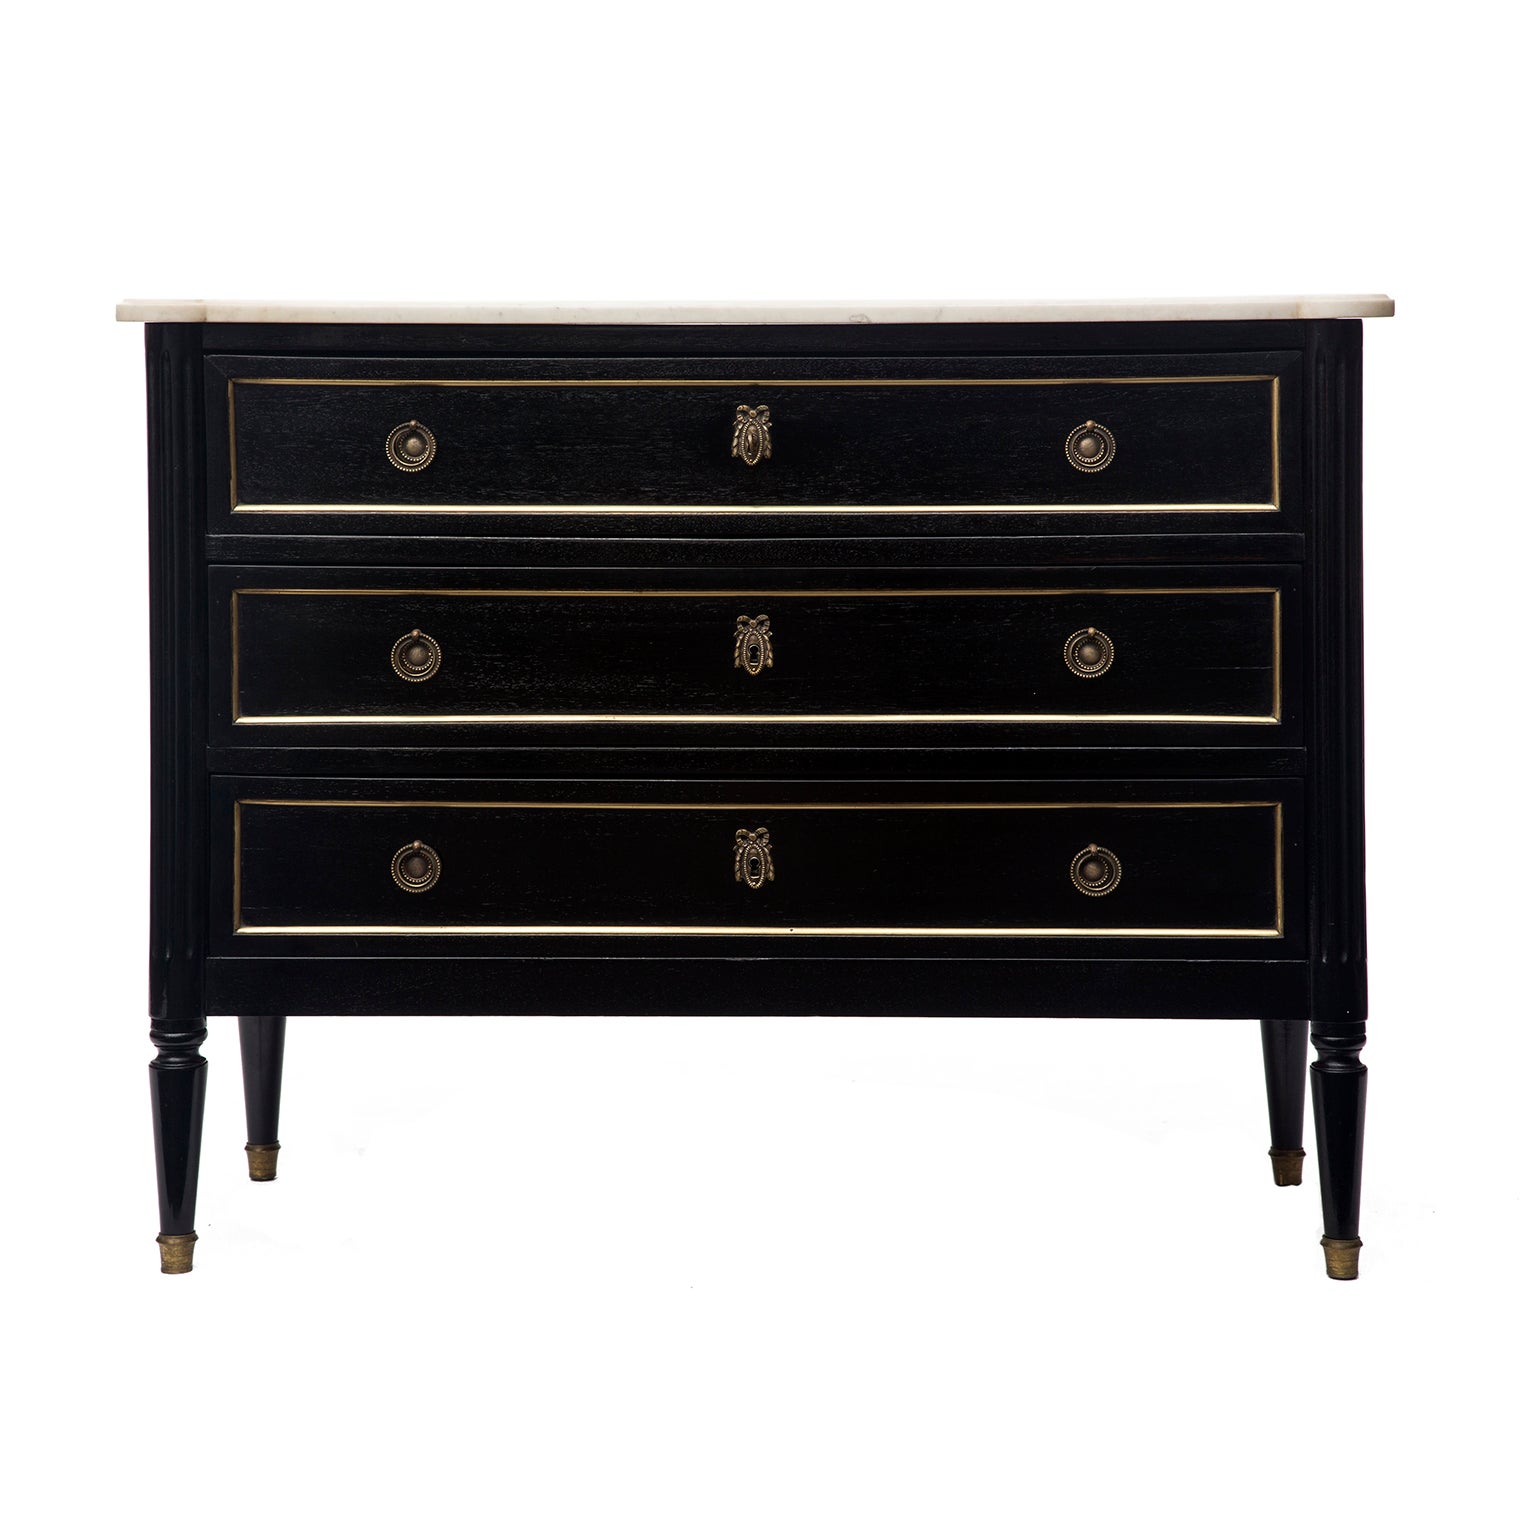 Louis XVI Marble Top Ebonized Chest of Drawers